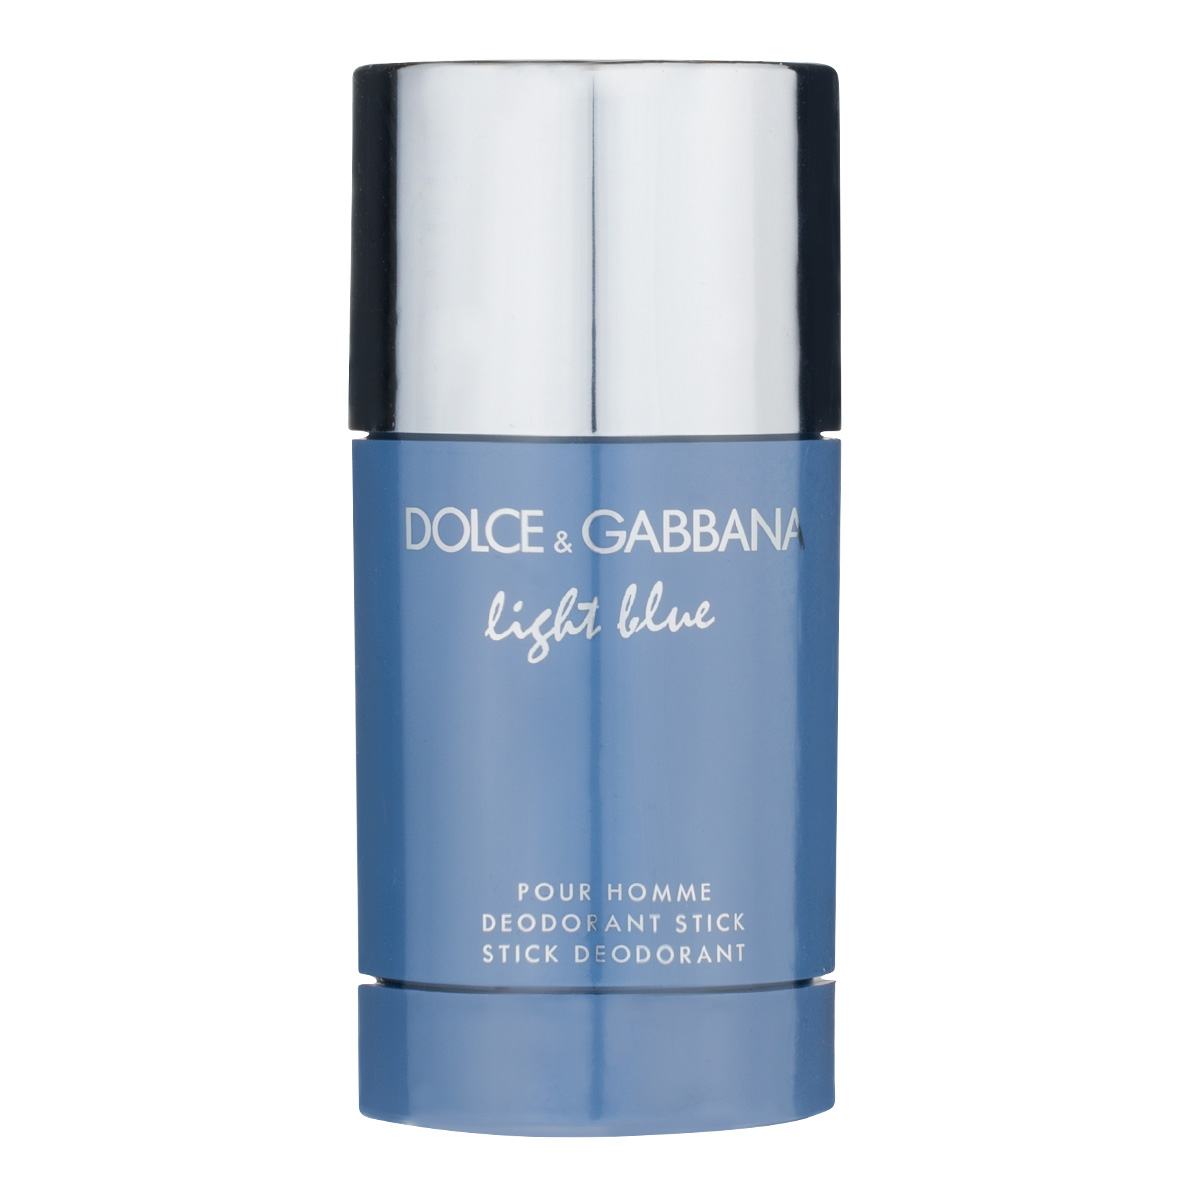 Dolce & Gabbana Light Blue Pour Homme Deodorant Stick 70g | Beautybuys ...